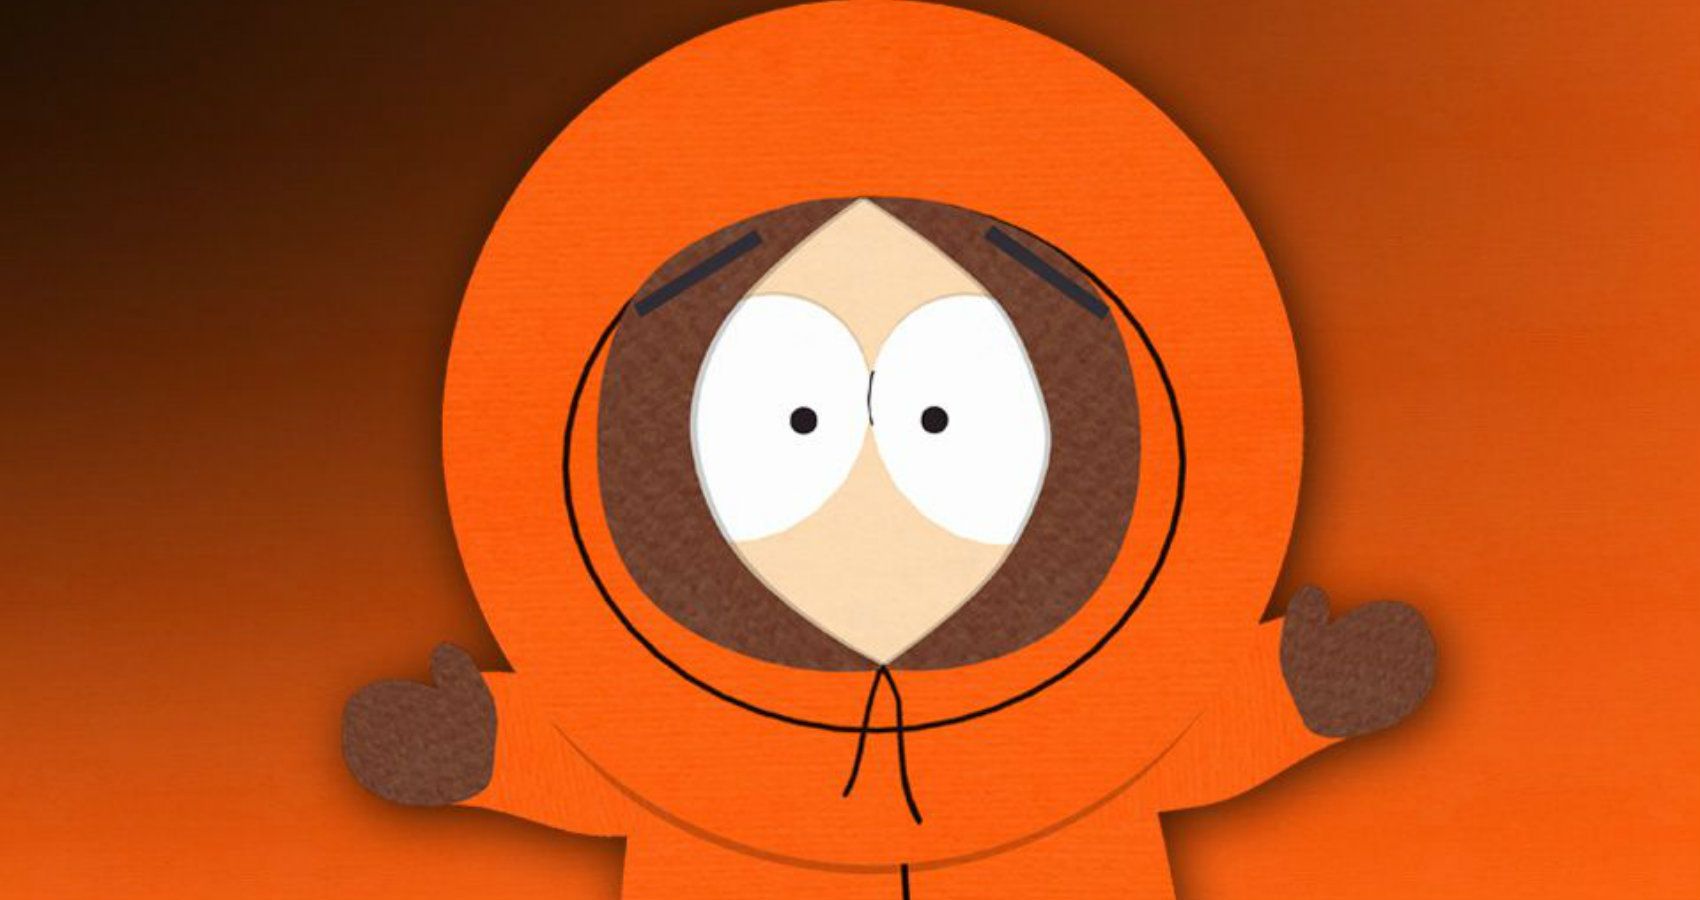 We all know and love Kenny McCormick as the quiet kid from South Park who i...